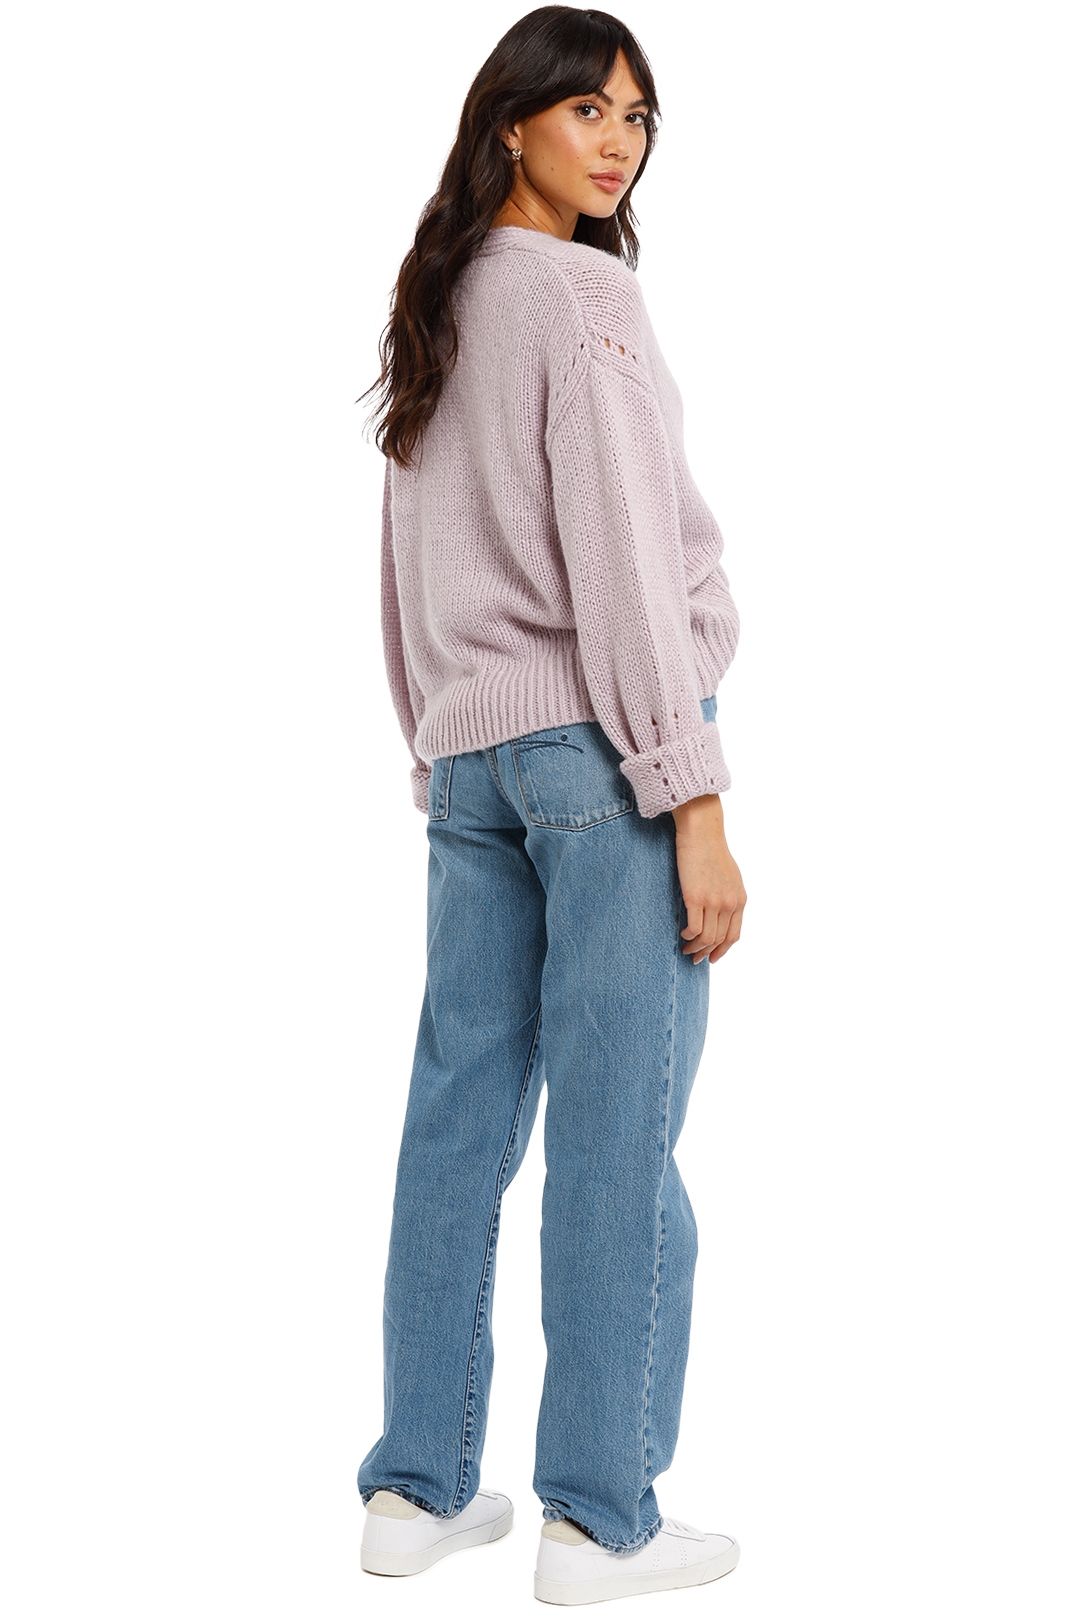 Bec and Bridge Willa Knit Jumper Lavender relaxed